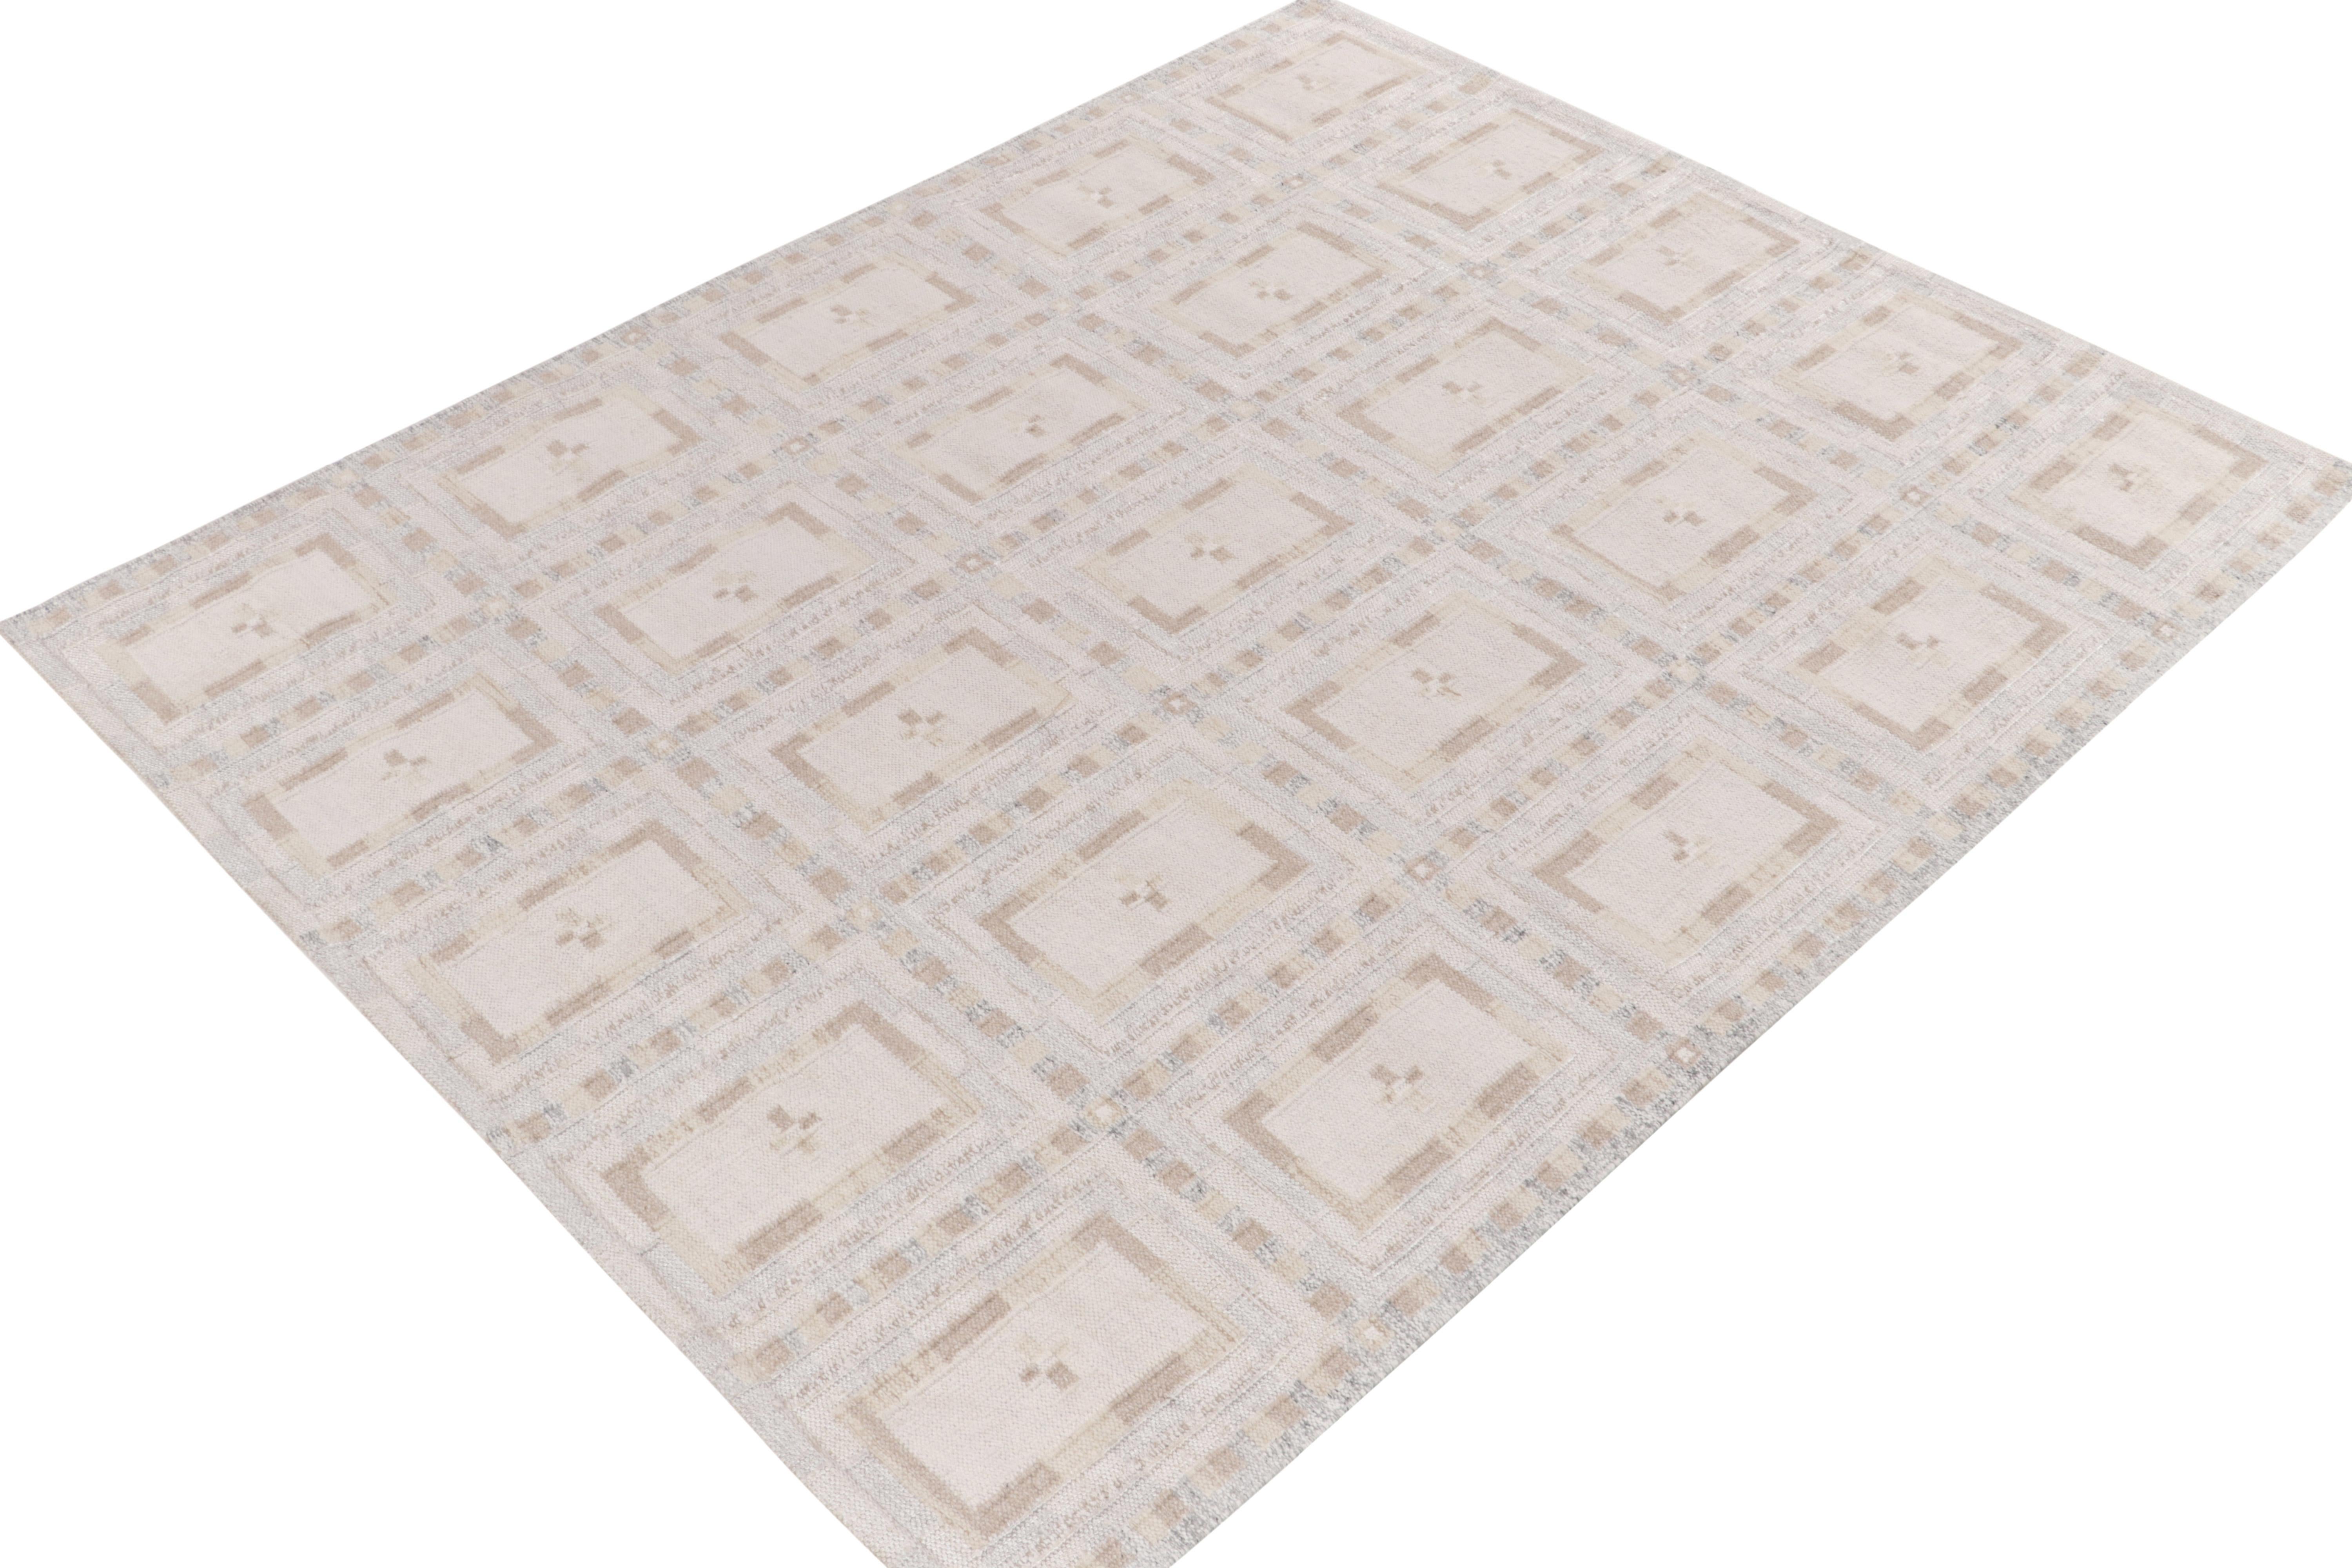 An 8x10 Swedish style kilim rug from our award-winning Scandinavian flat weave selections. The piece showcases a sophisticated play of beige & brown with gray blue for an intricate, yet cool accent to the white hues. Connoisseurs may note this